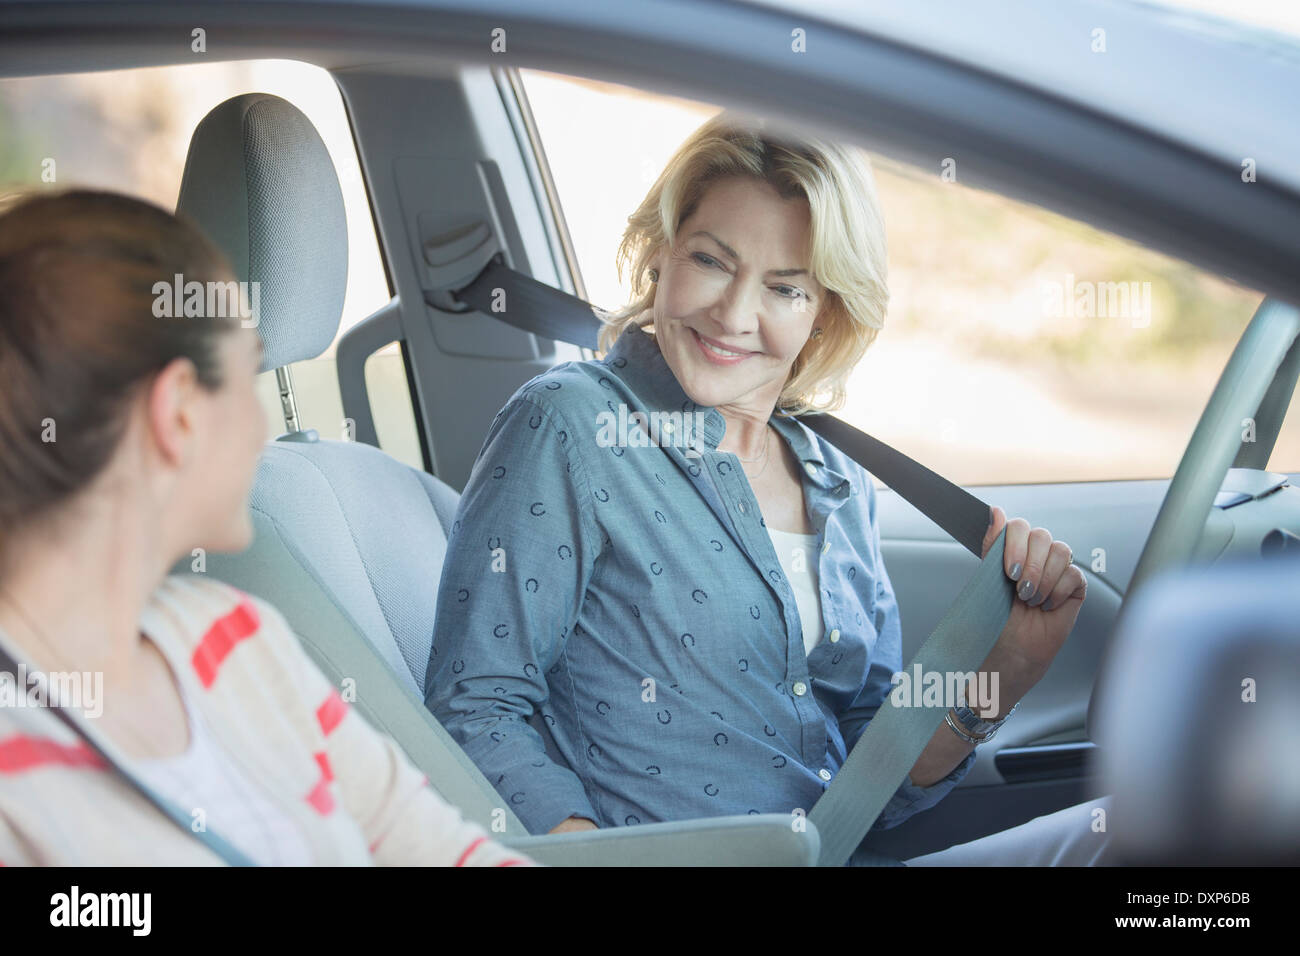 Mother and daughter inside car Stock Photo